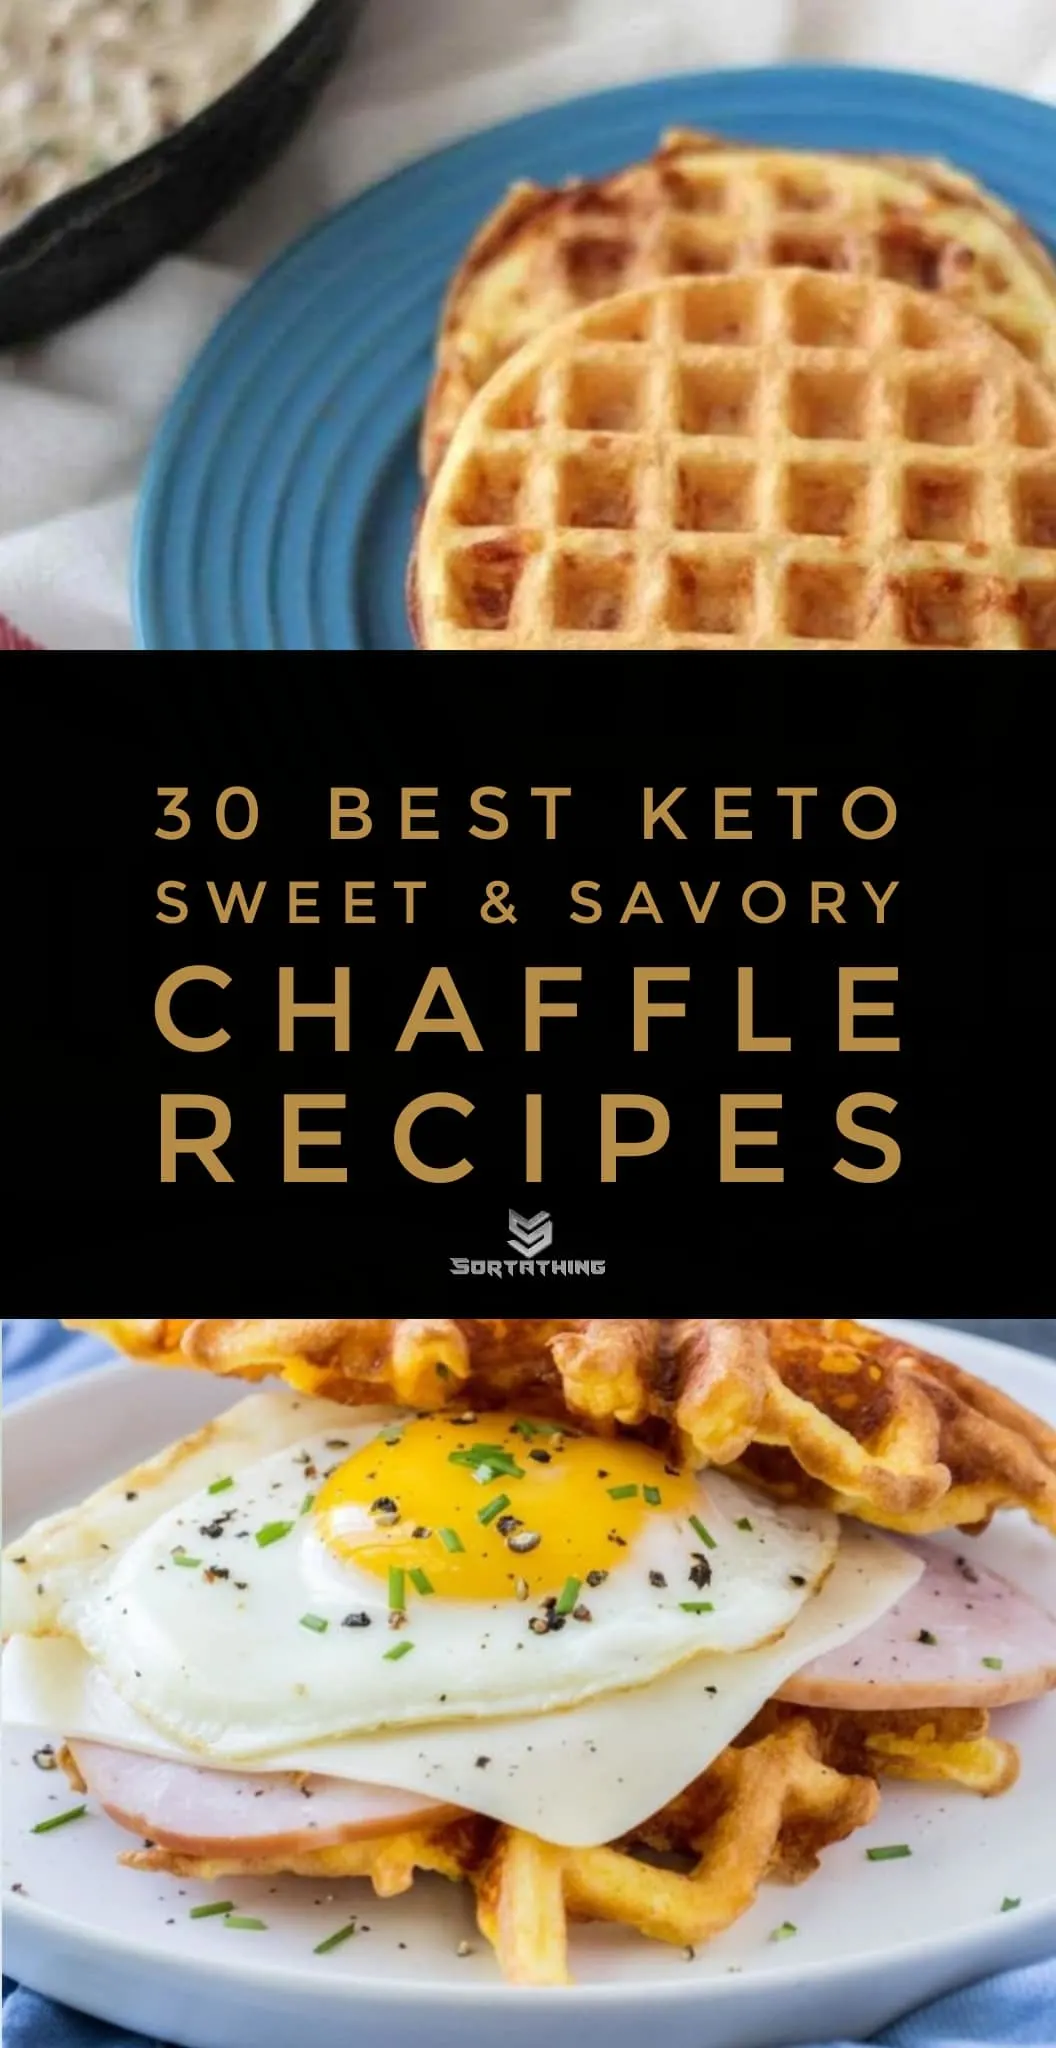 Sausage Gravy Chaffle and The Best Grain-Free Keto Chaffle Recipe